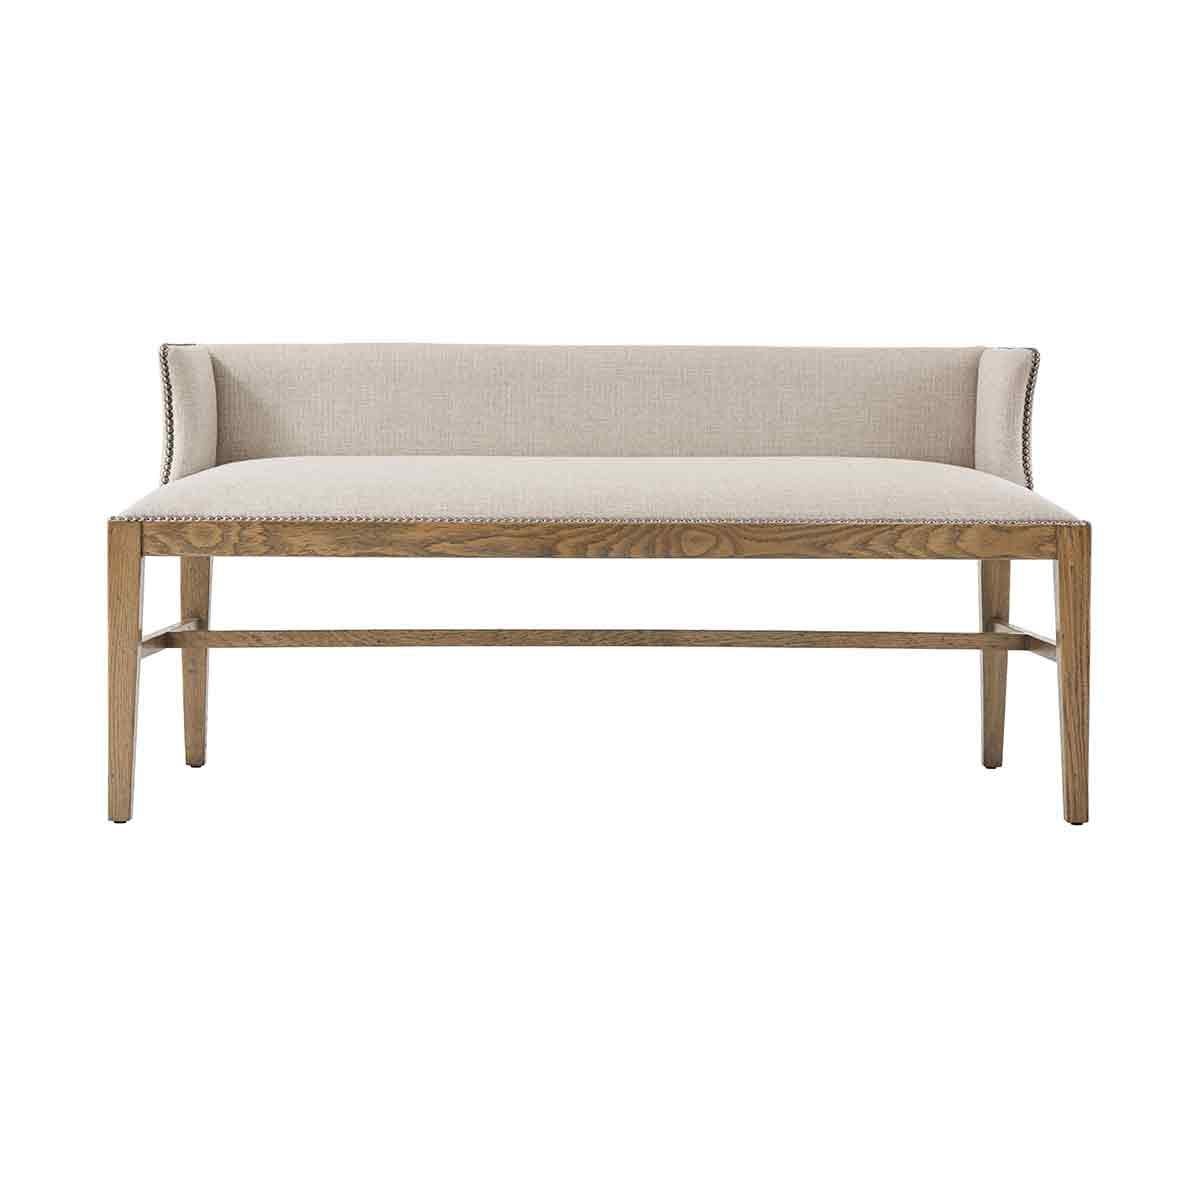 A traditionally styled and contemporary-inspired bench or settee with a solid oak wood frame finished in Echo Oak. 

Dimensions: 54